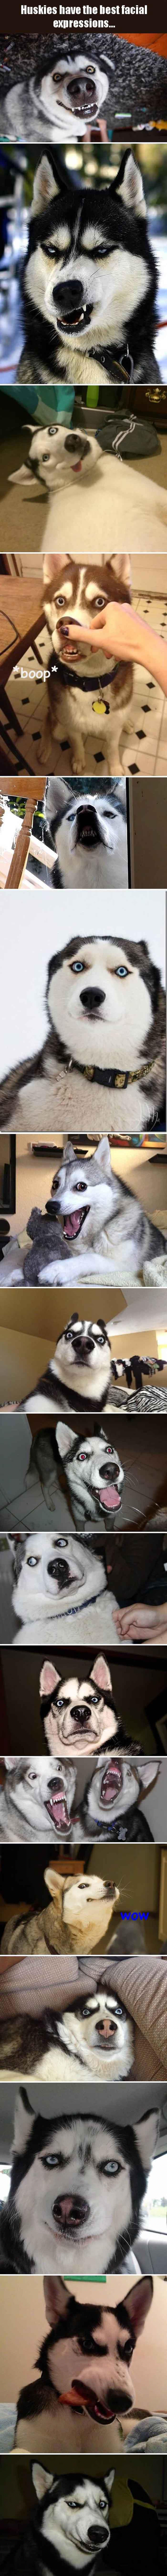 huskies have the best facial expressions